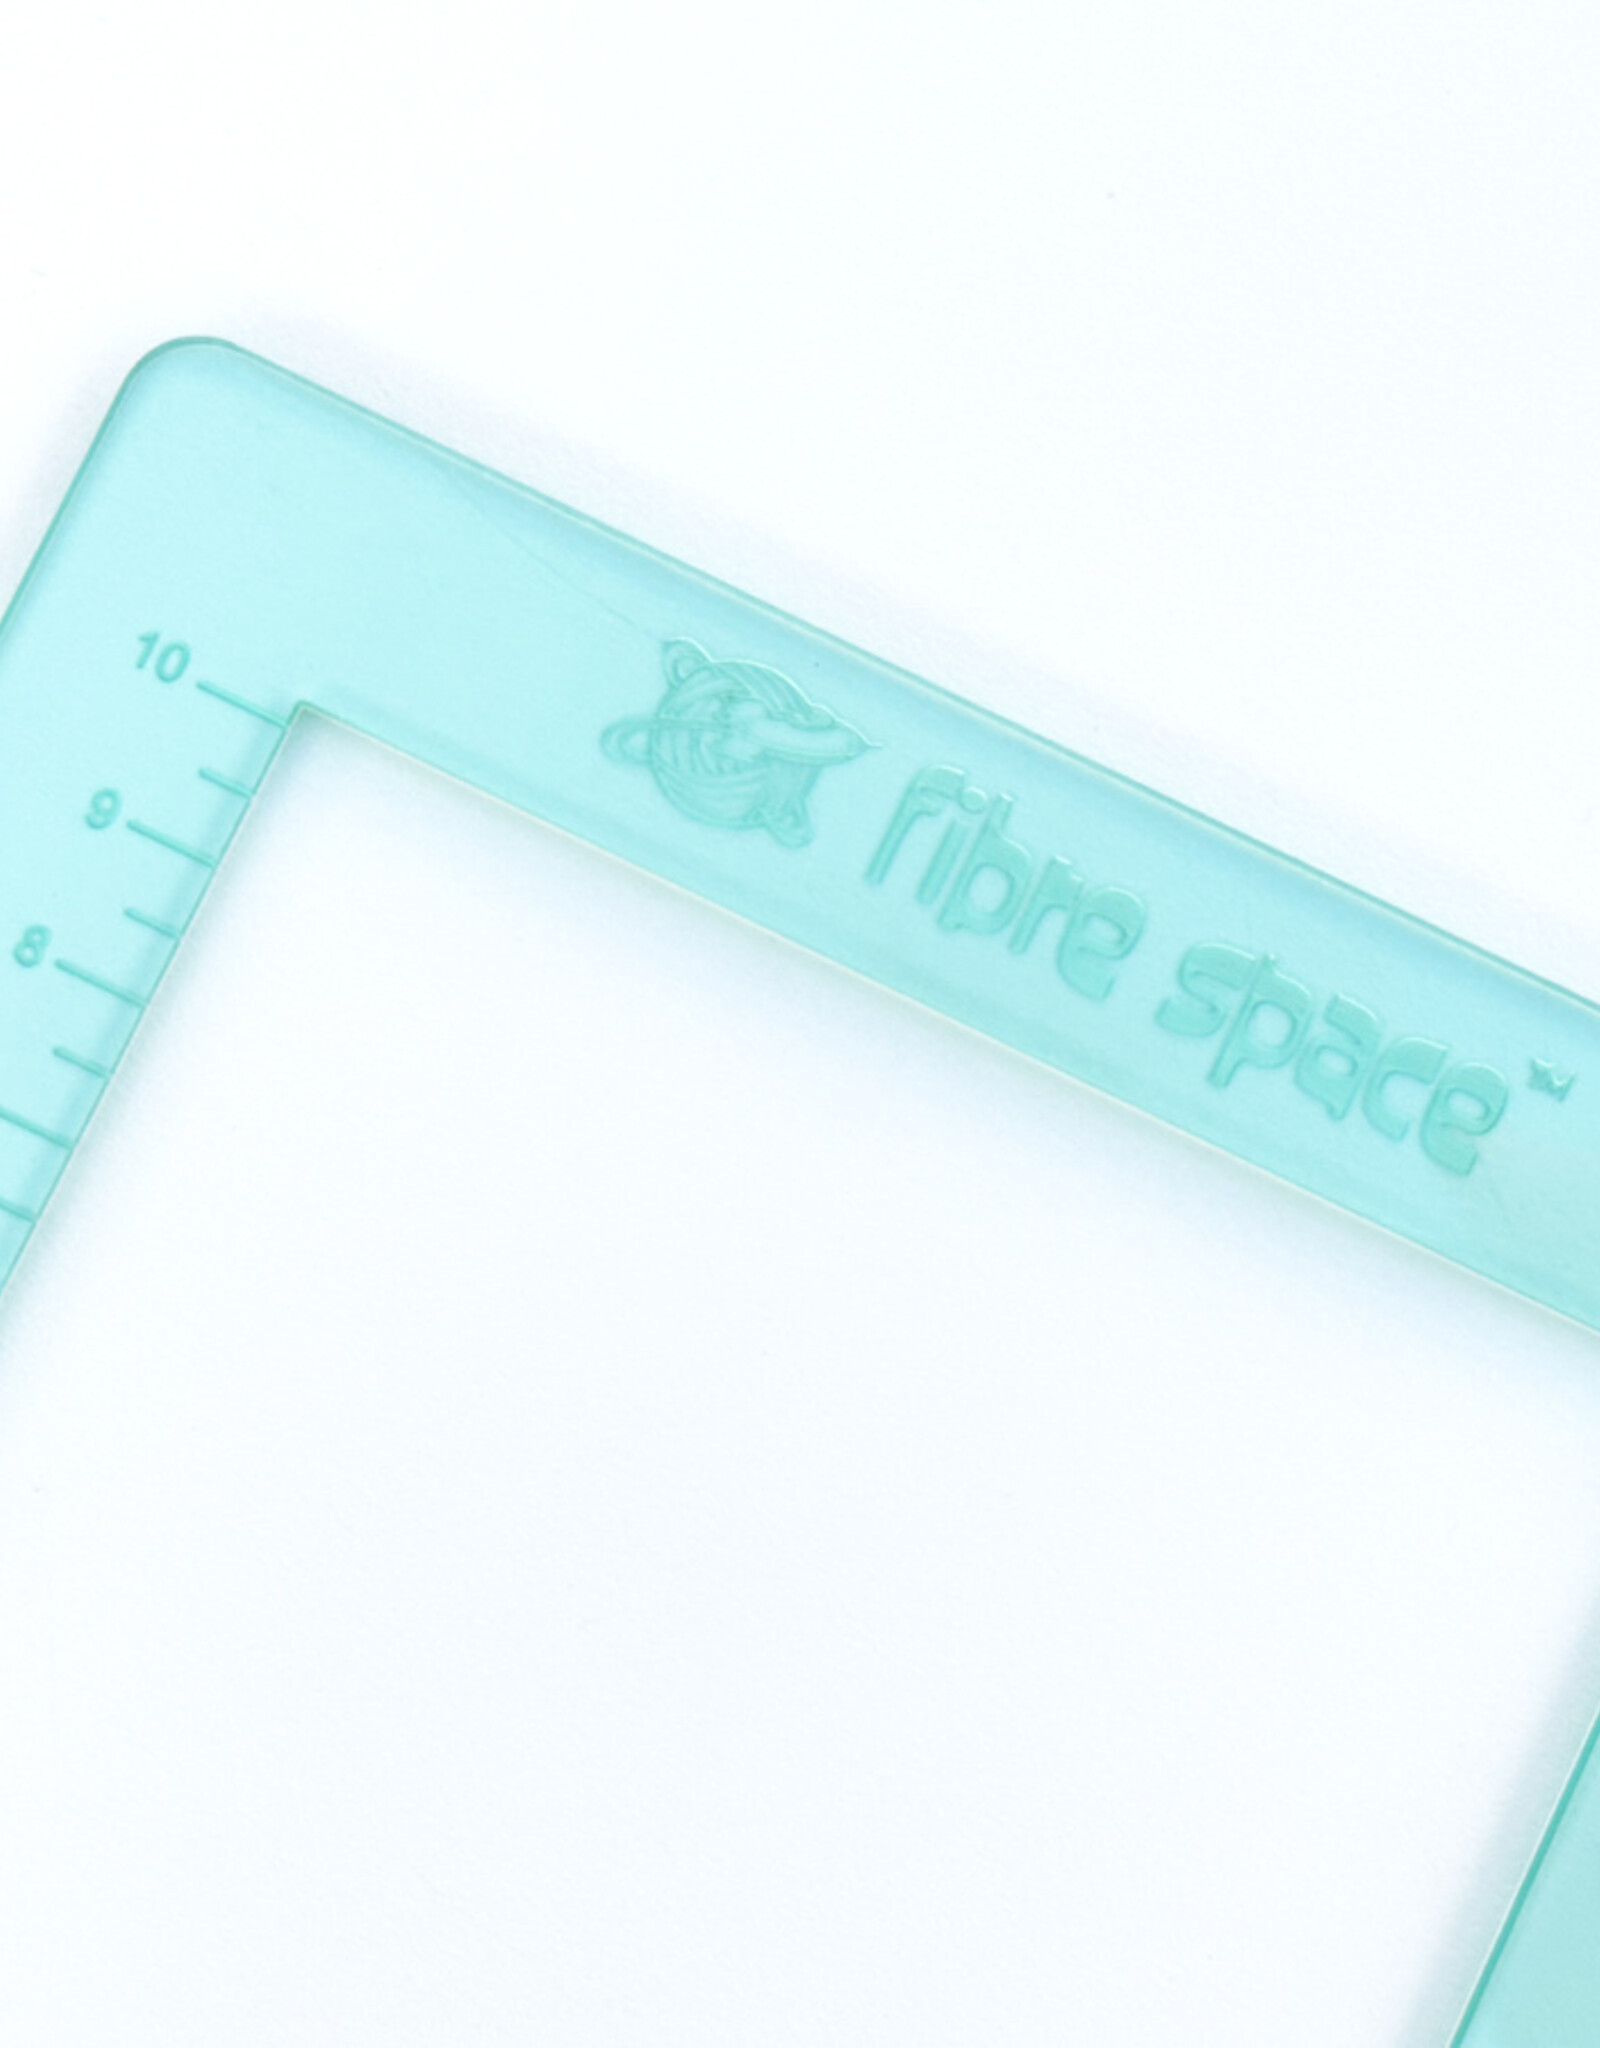 Katrinkles fibre space Swatch Ruler 4 Inch Square Teal